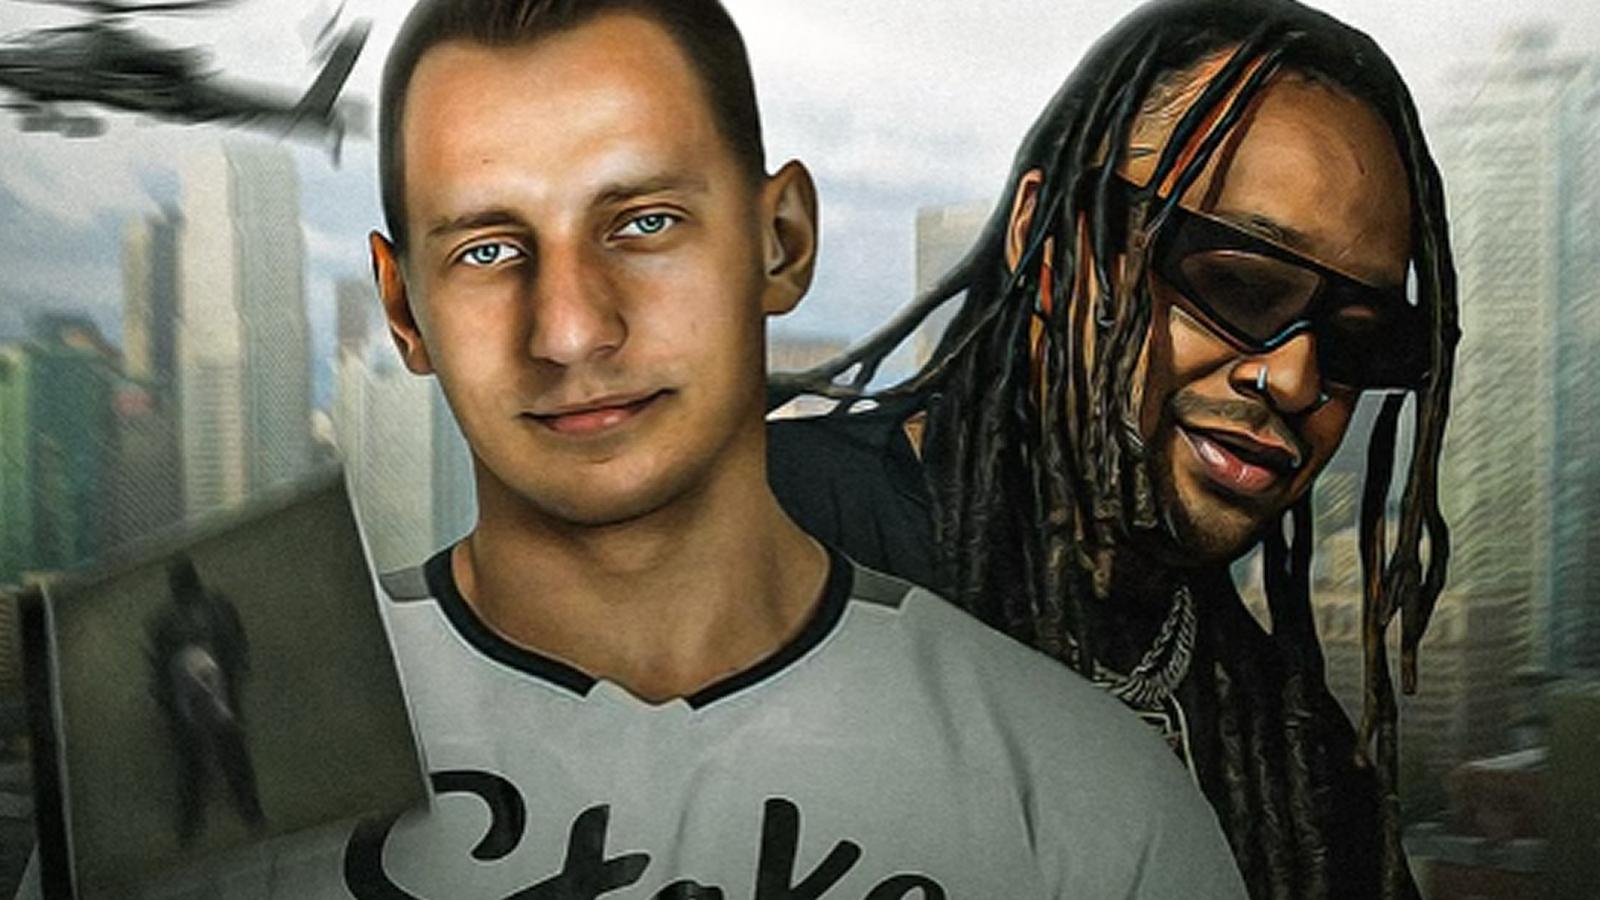 Vitaly and Ty Dolla Sign promoting their "catching predators" series